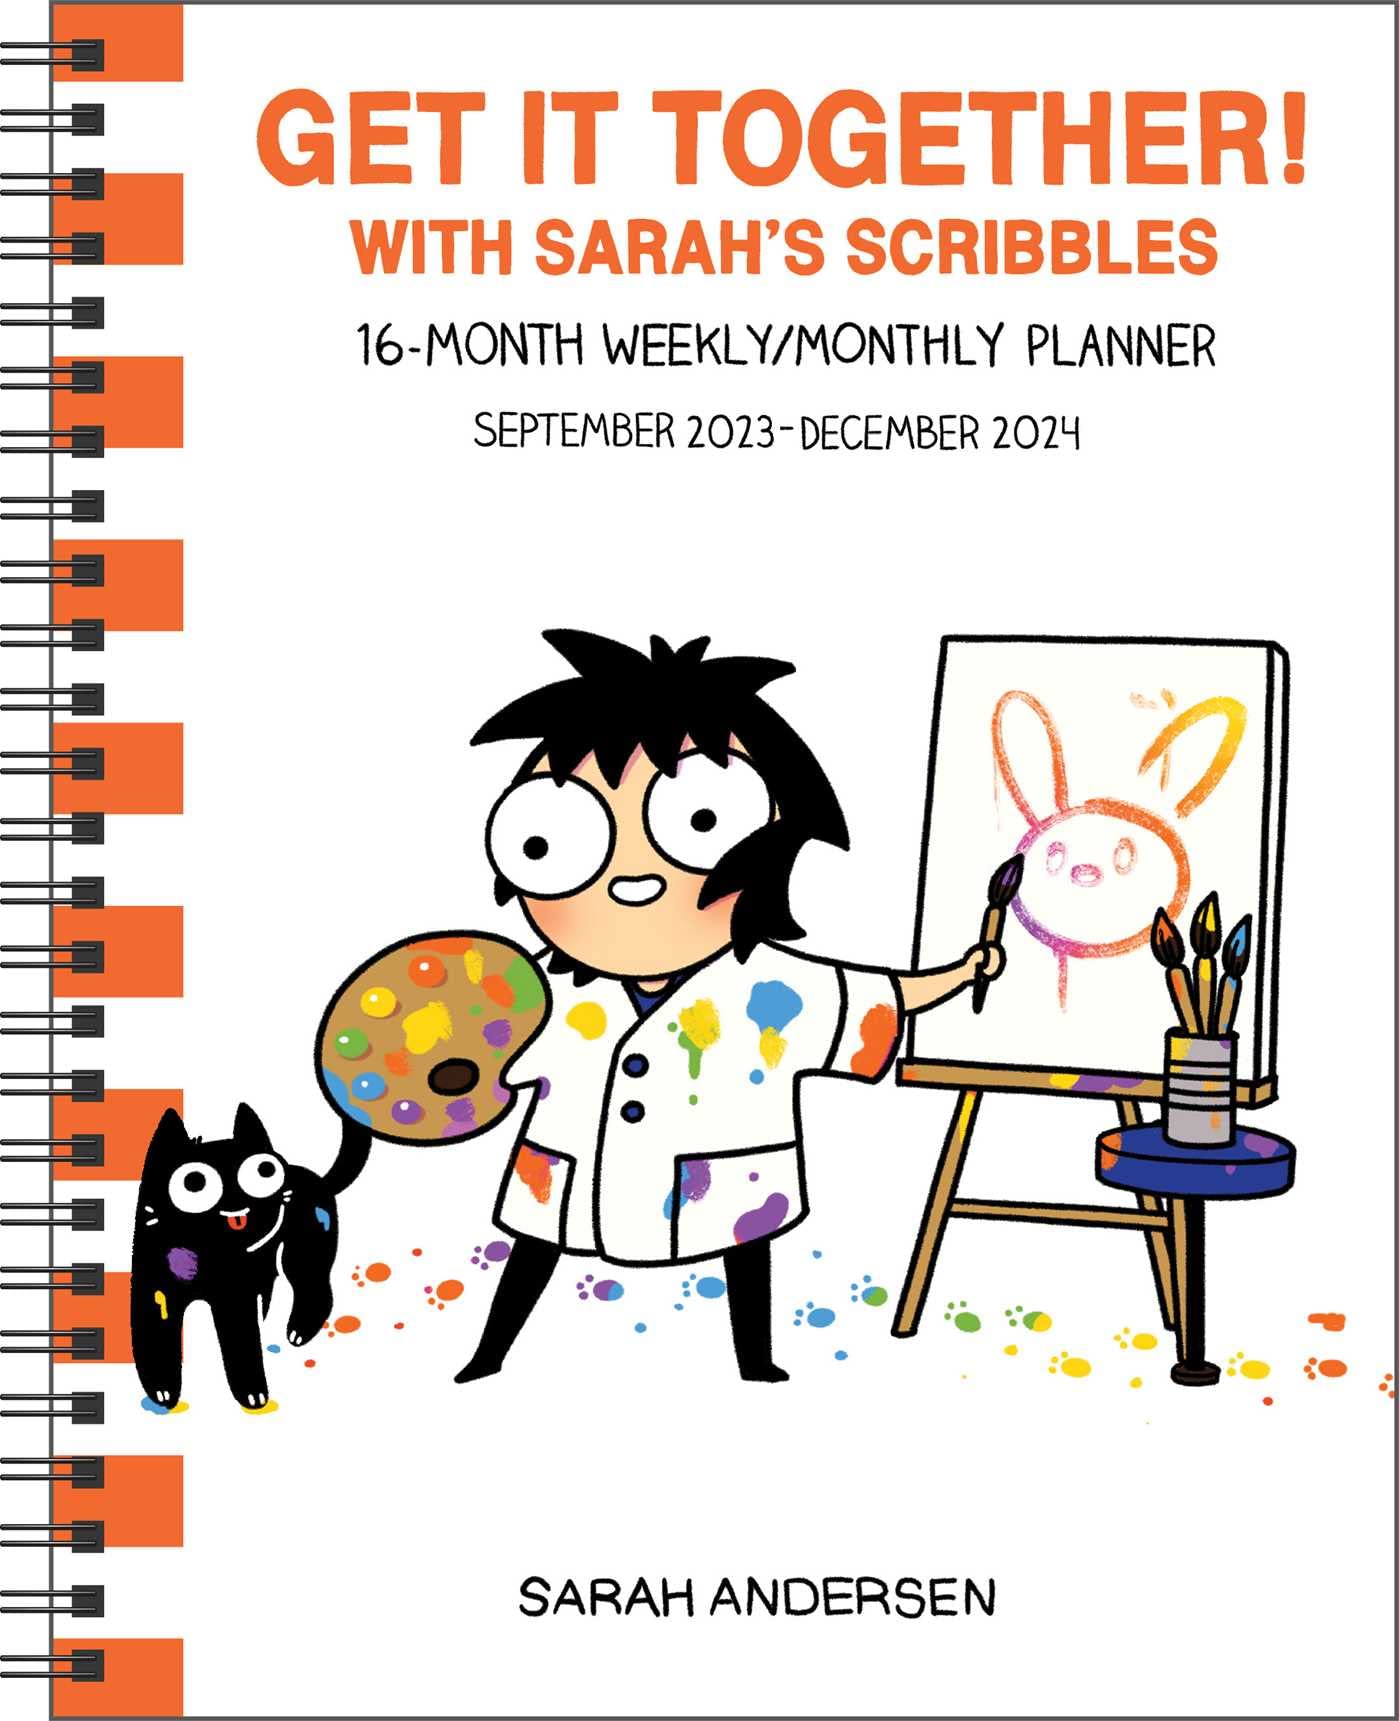 Calendar 2023-2024 - 16-Month Monthly/Weekly - Sarah\'s Scribbles - Get It Together! | Andrews McMeel Publishing